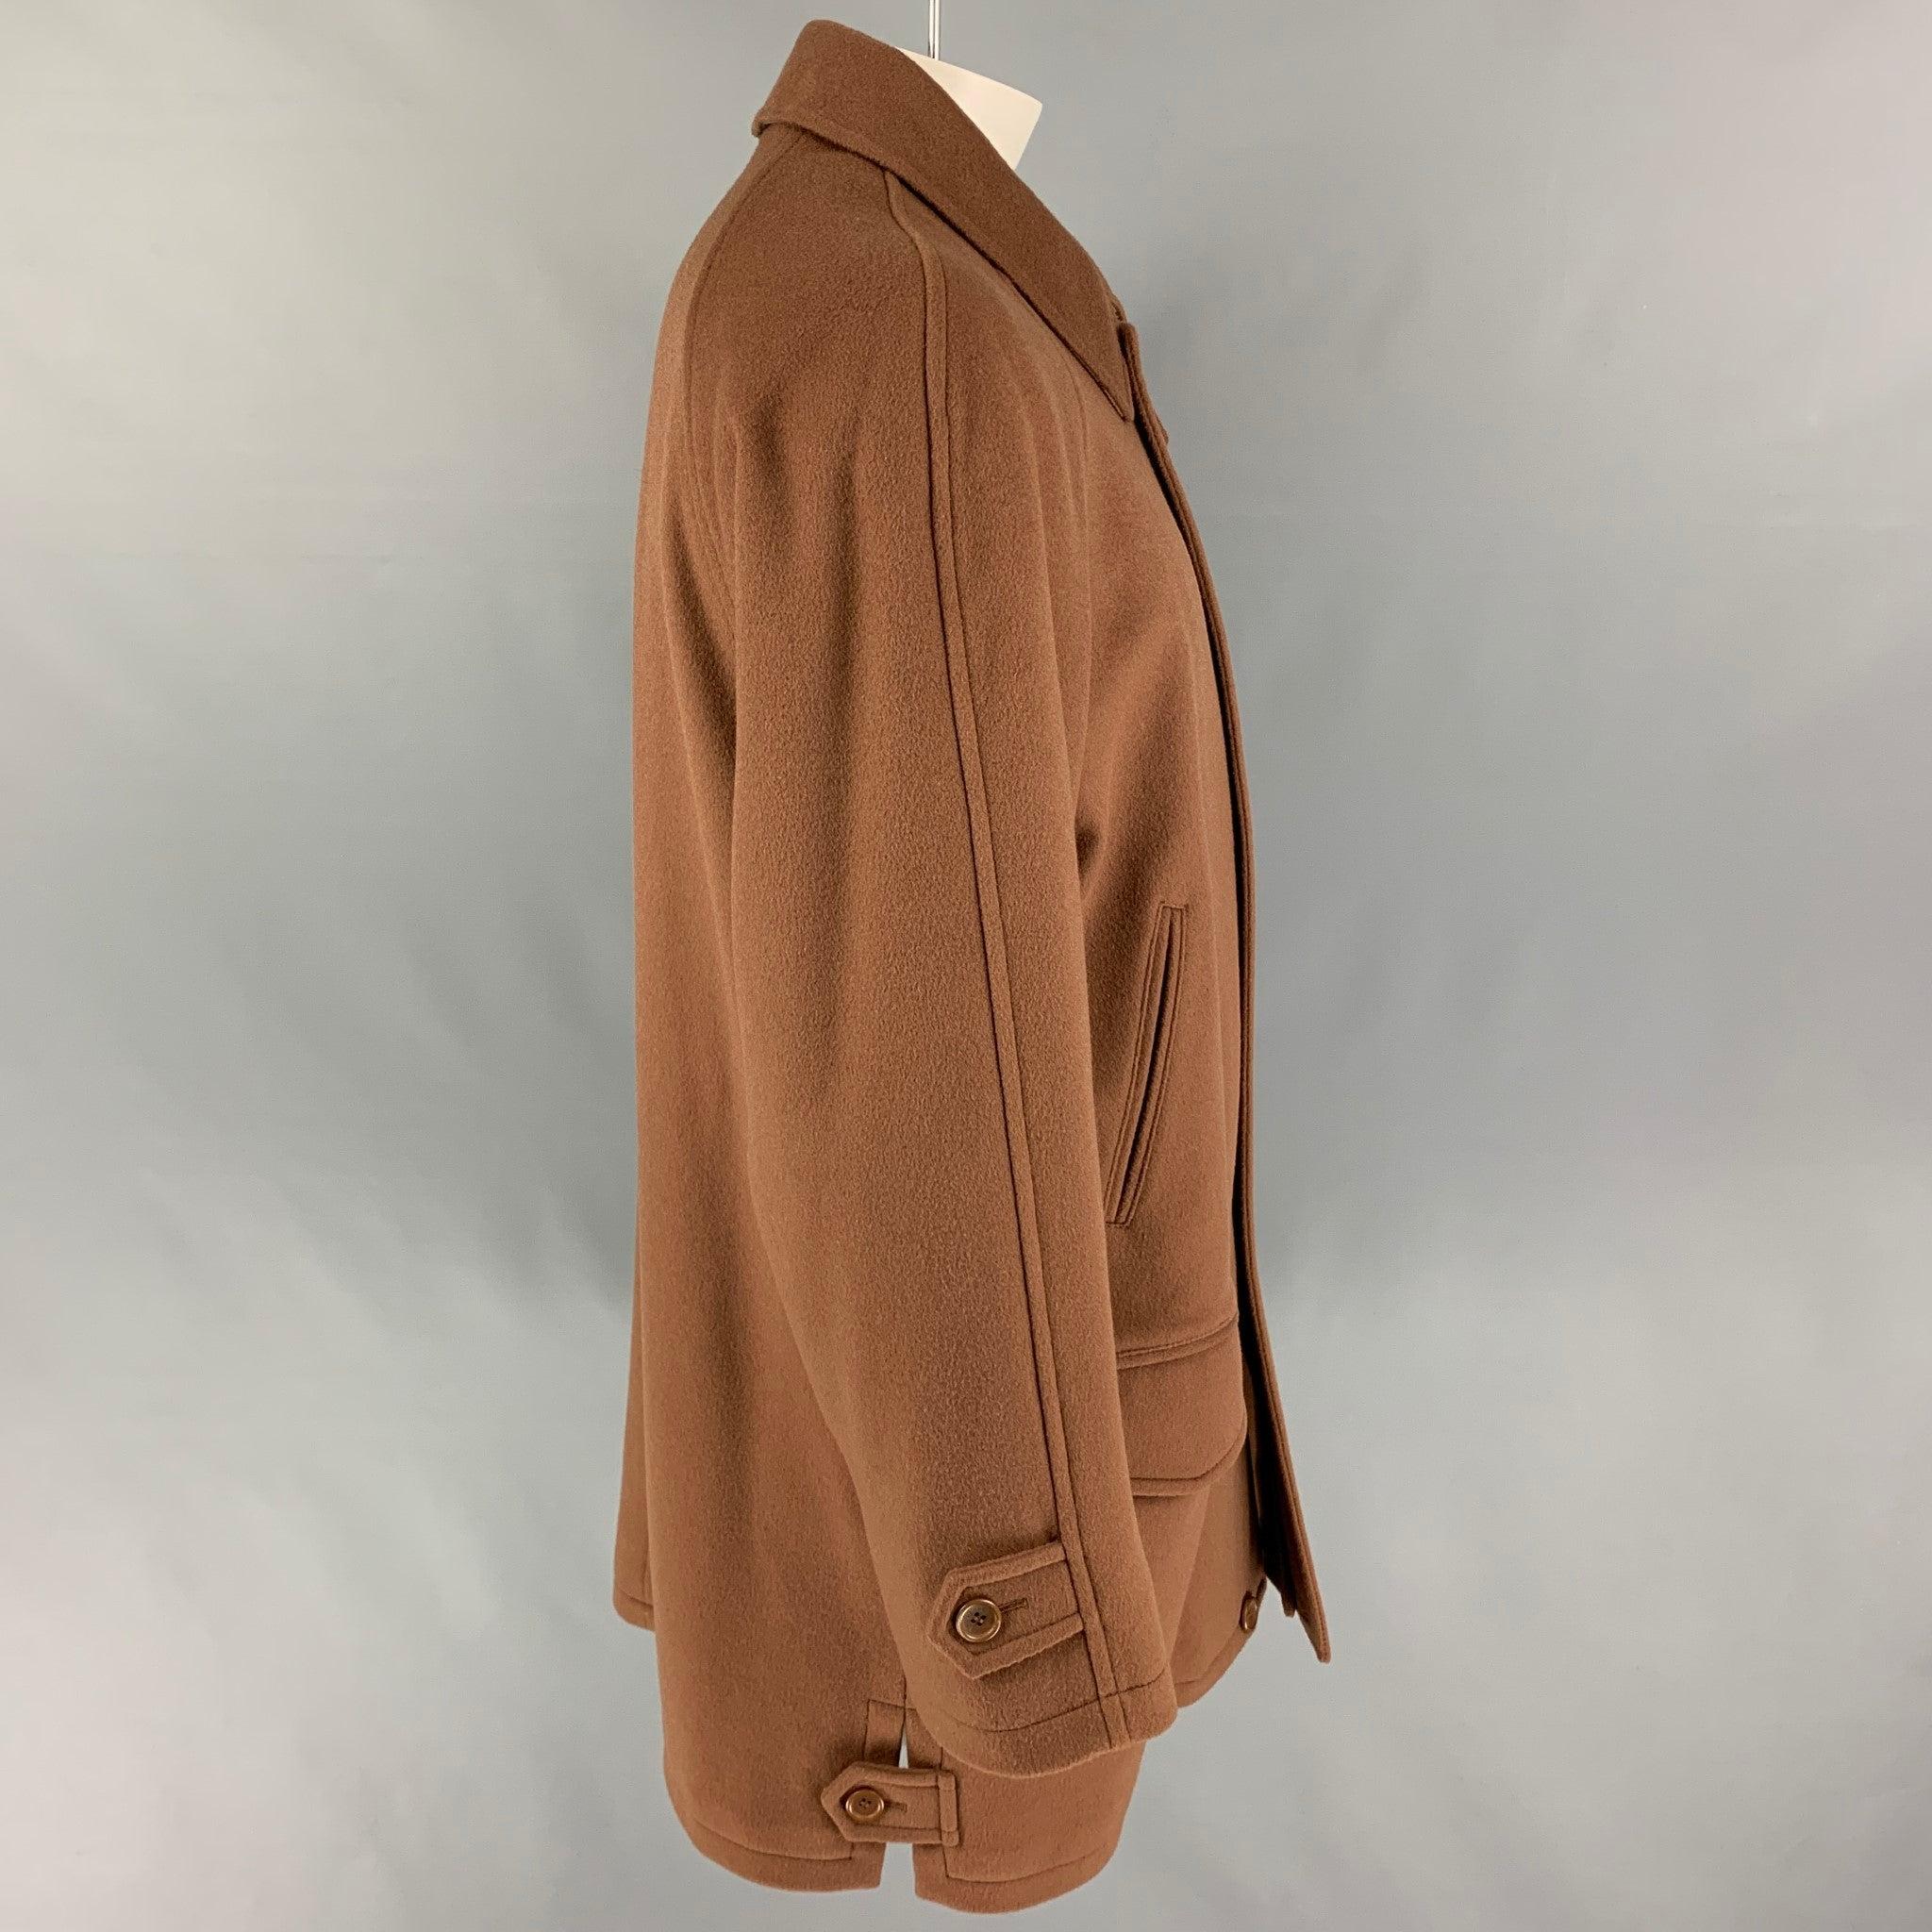 BURBERRY LONDON coat comes in a brown material with a quilted interior featuring a spread collar, front pockets, side tabs, and a zip & buttoned closure. Made in Italy. Very Good
Pre-Owned Condition. Fabric tag removed. 

Marked:  Size tag removed